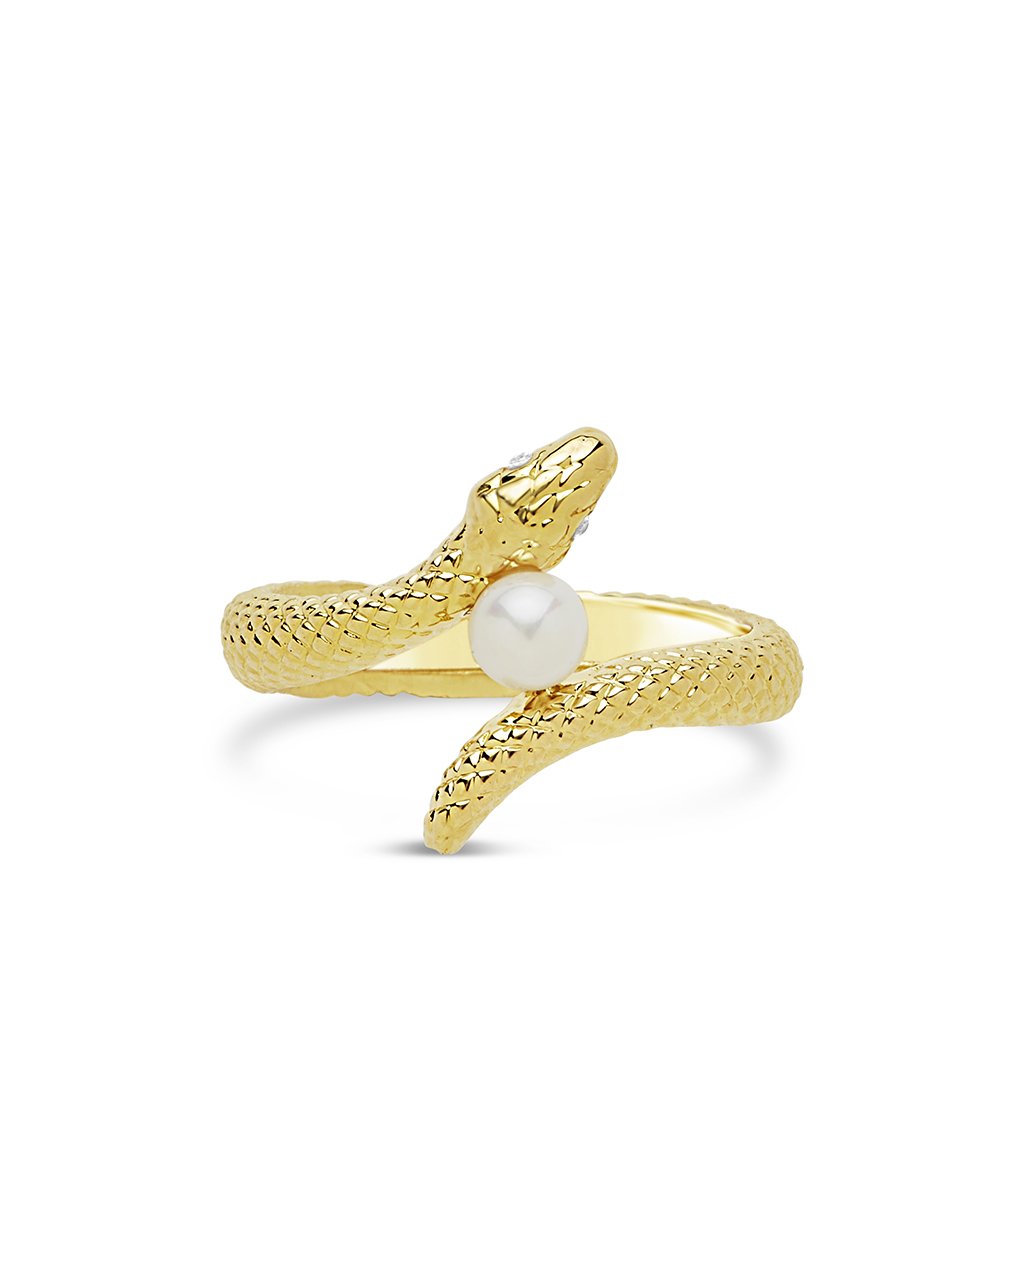 Entwined Serpent & Pearl Ring - Sterling Forever